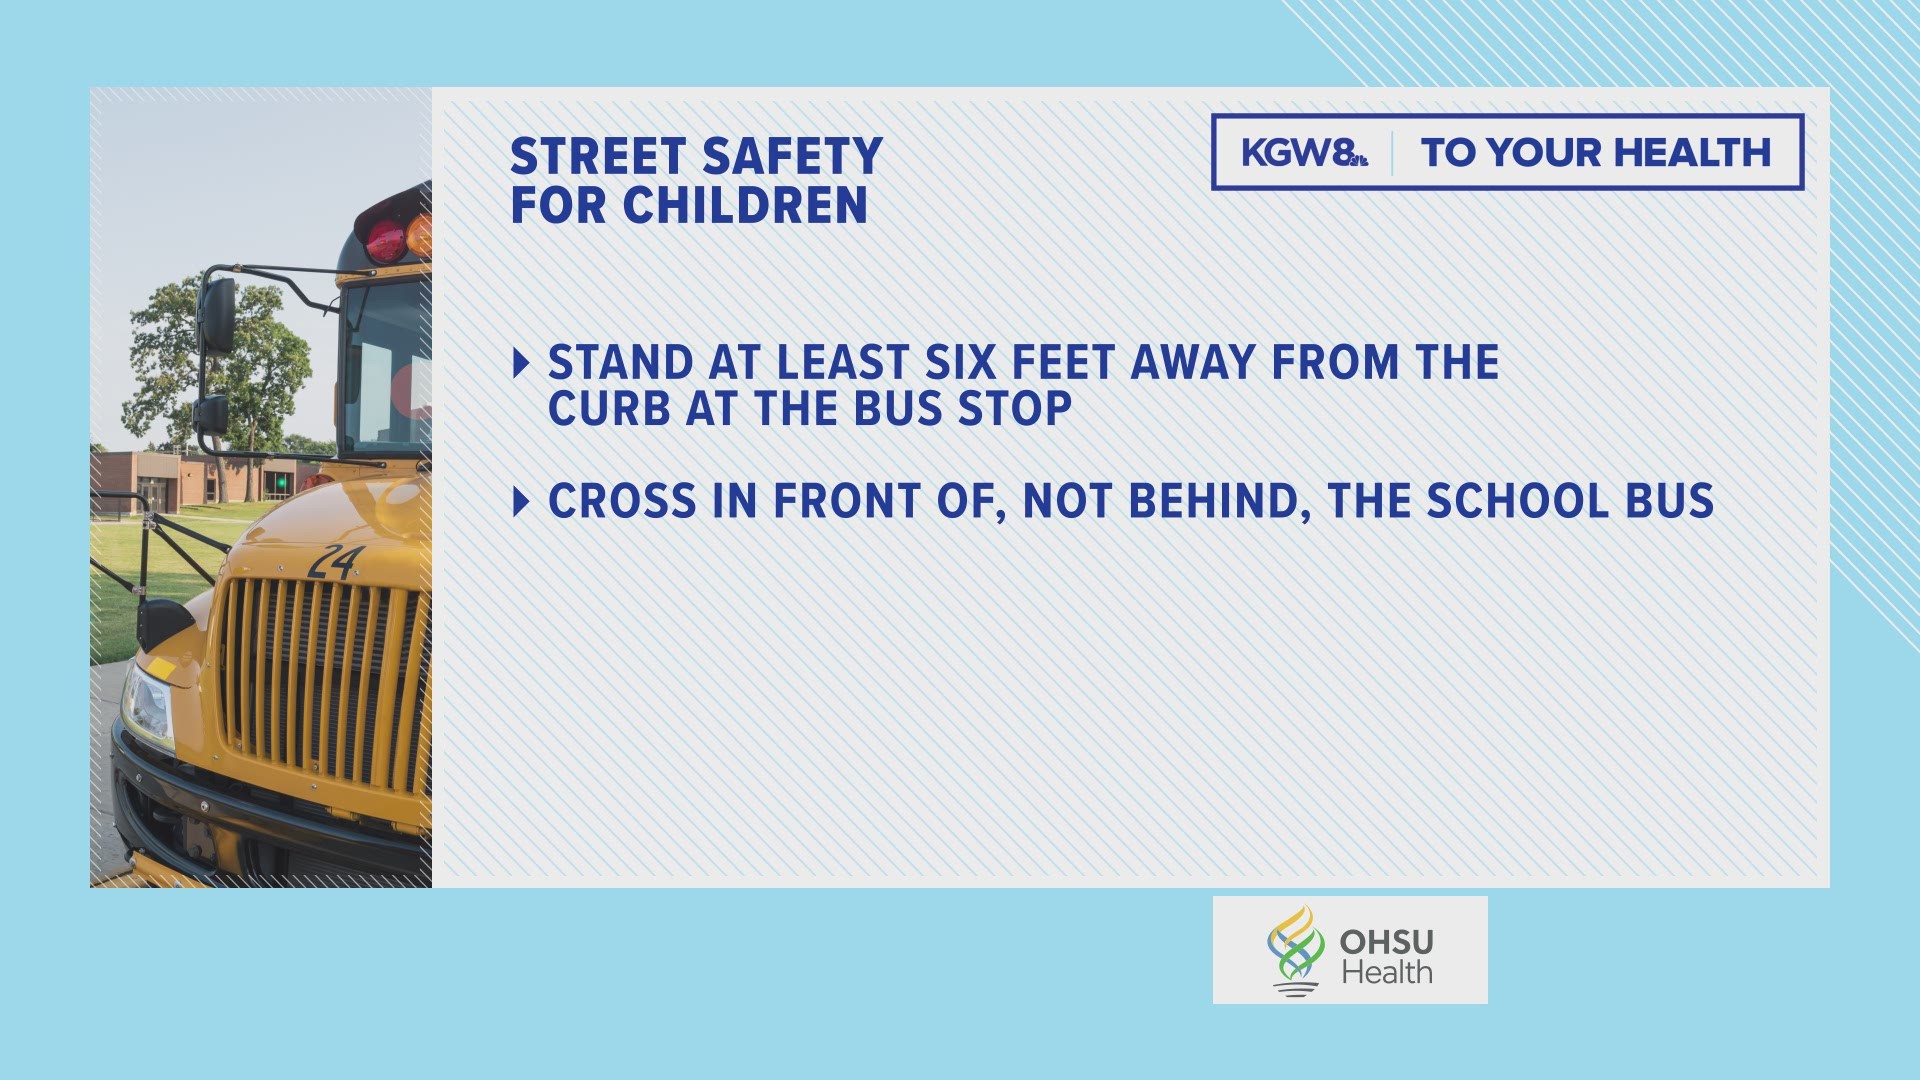 From OHSU Health, here are five tips to ensure street safety for children.